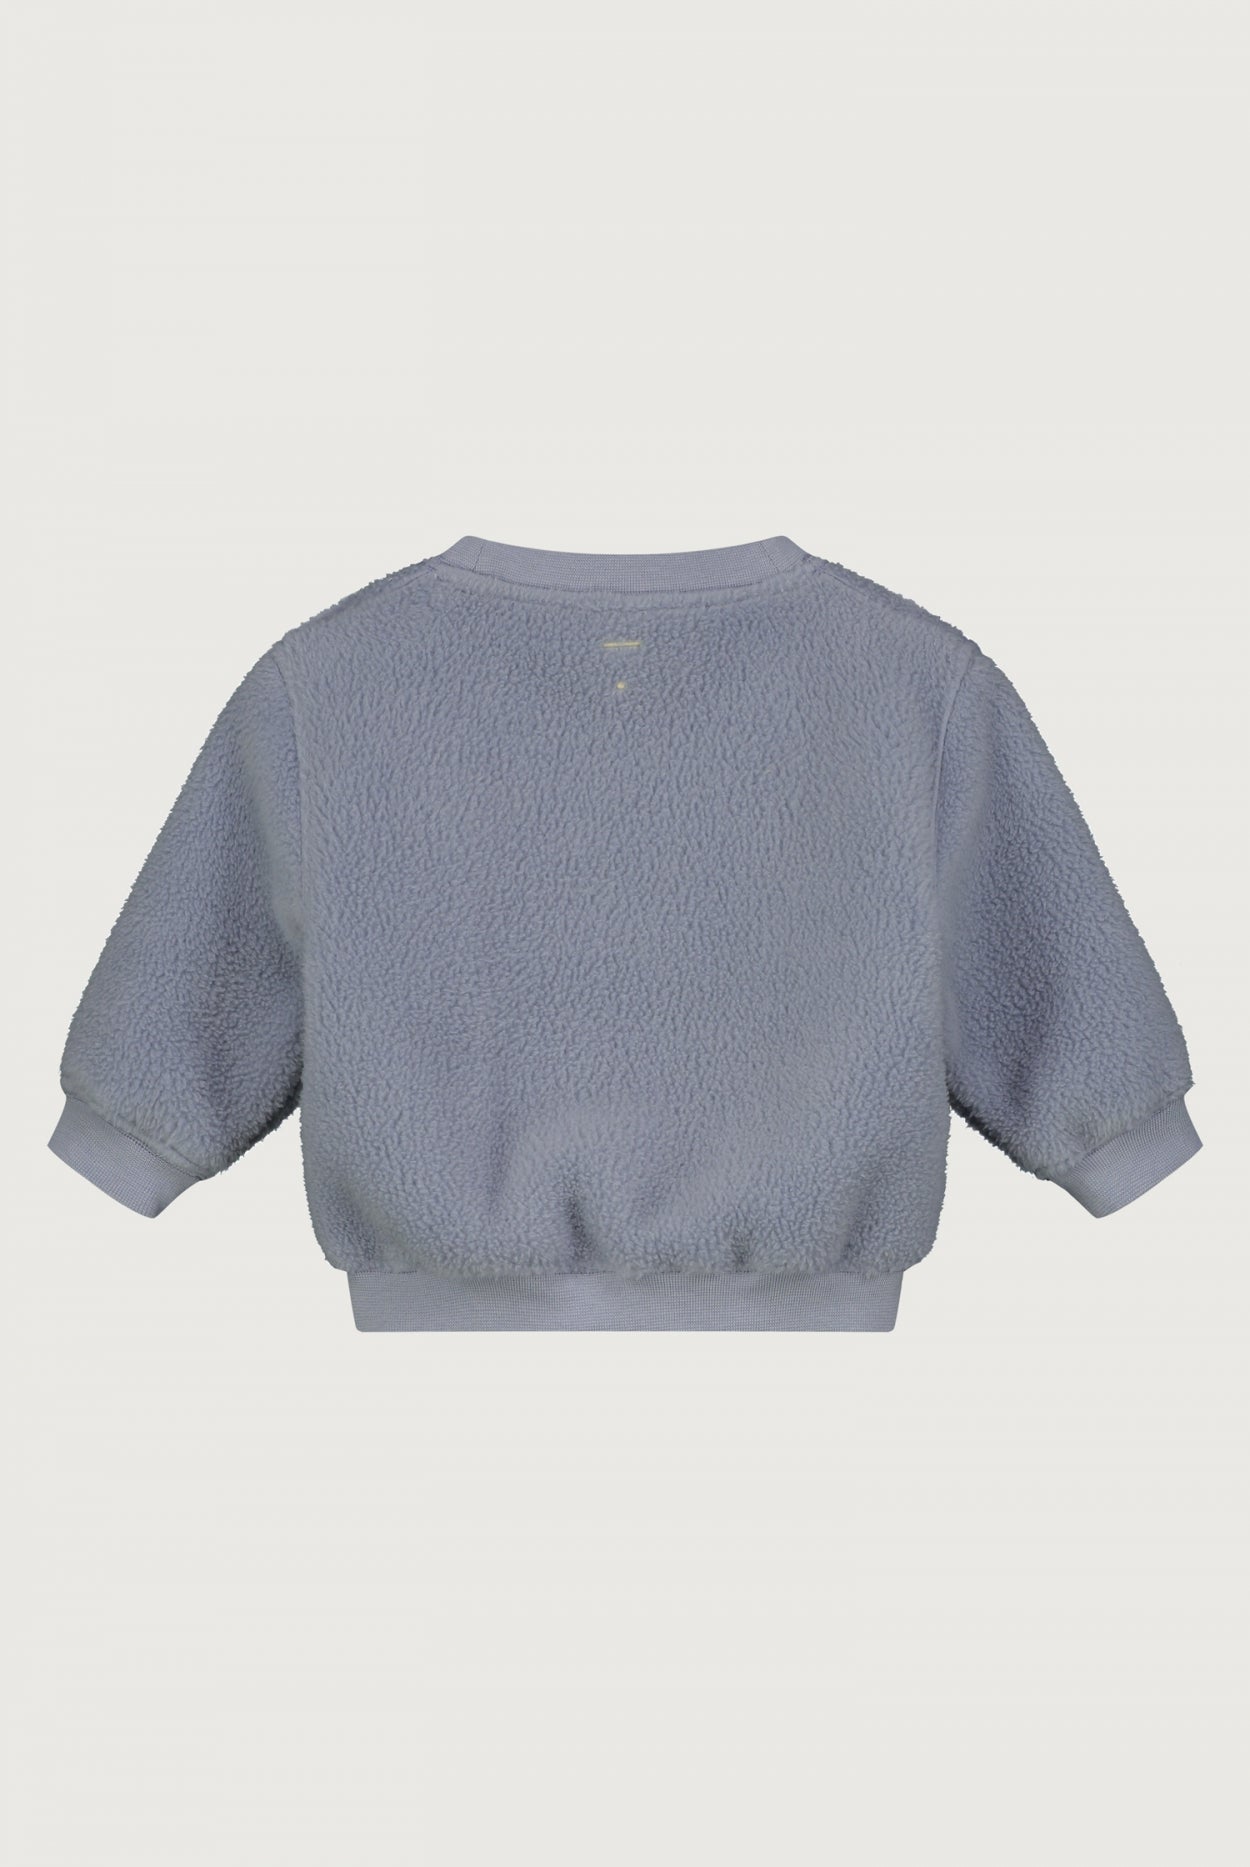 Baby Teddy Dropped Shoulder Sweater Stone Grey